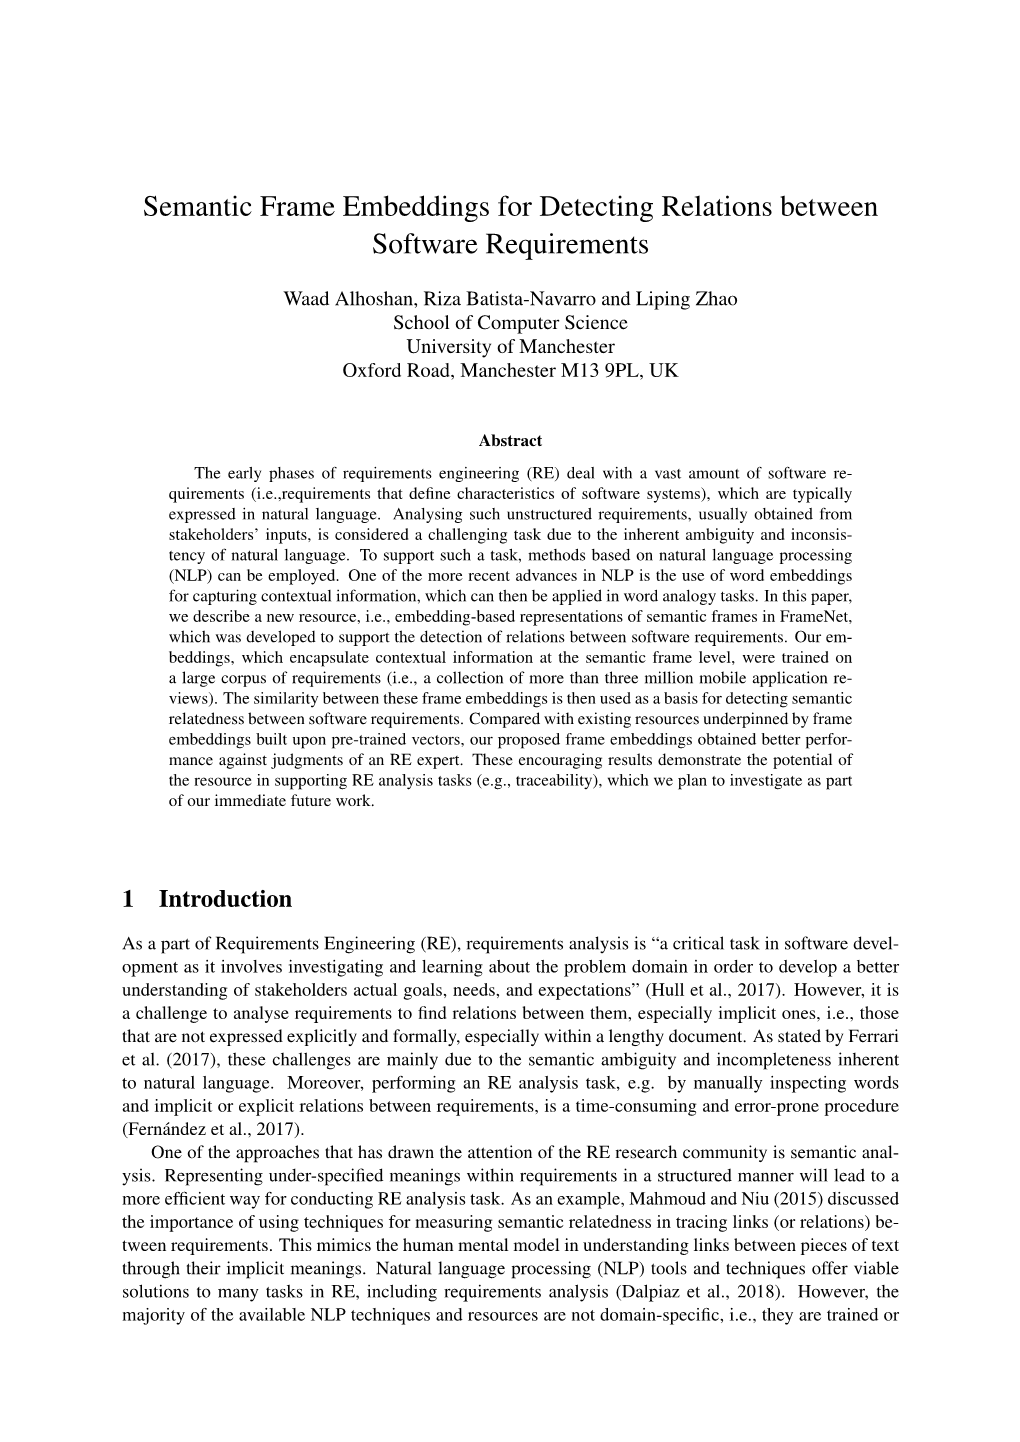 Semantic Frame Embeddings for Detecting Relations Between Software Requirements